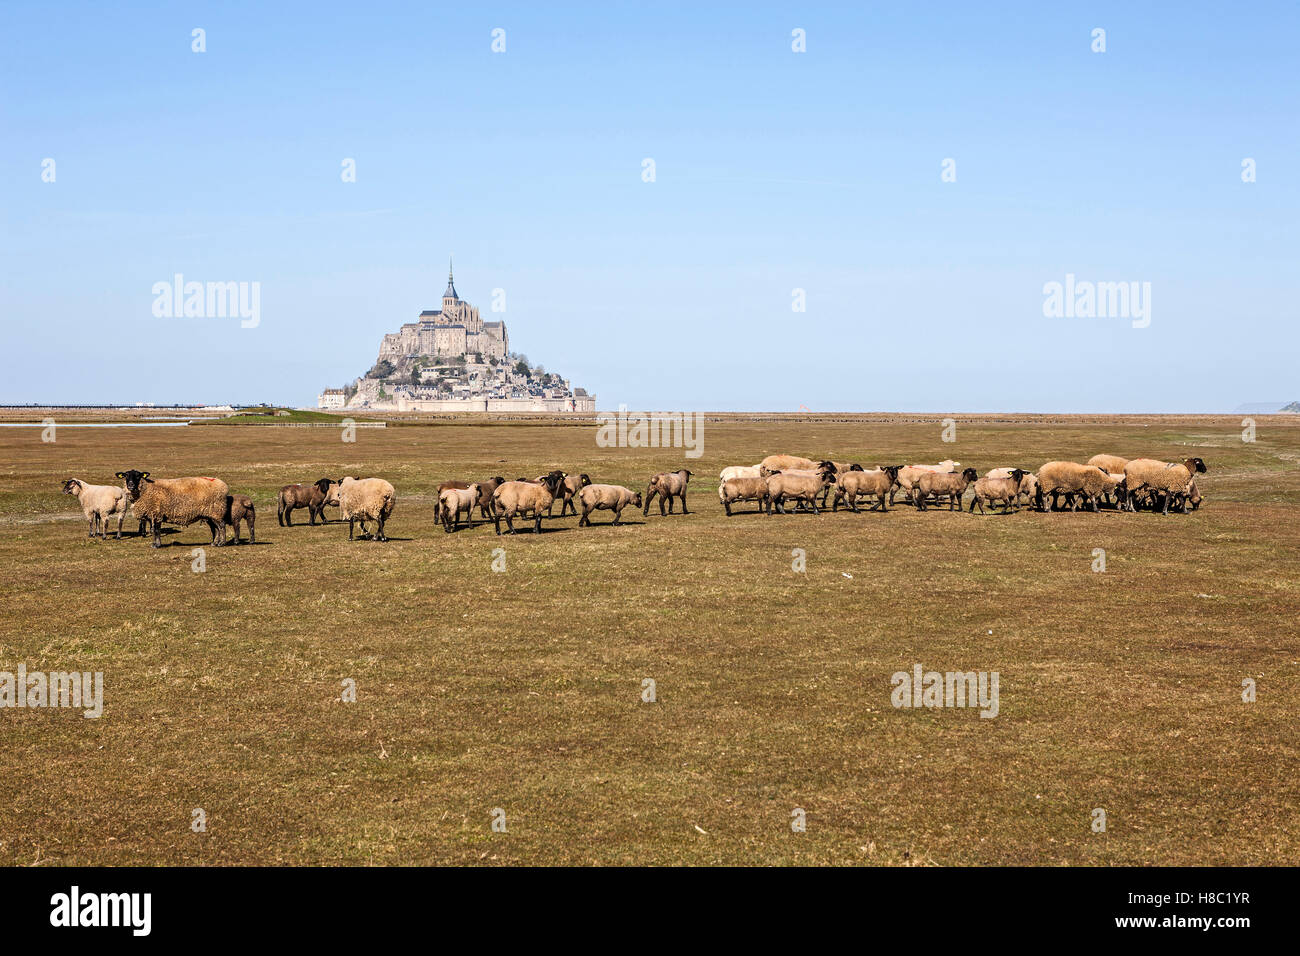 Mont Saint-Michel (Saint Michael's Mount), (Normandy, north-western France): sheep going to the salt marshes for the first time this year. Stock Photo